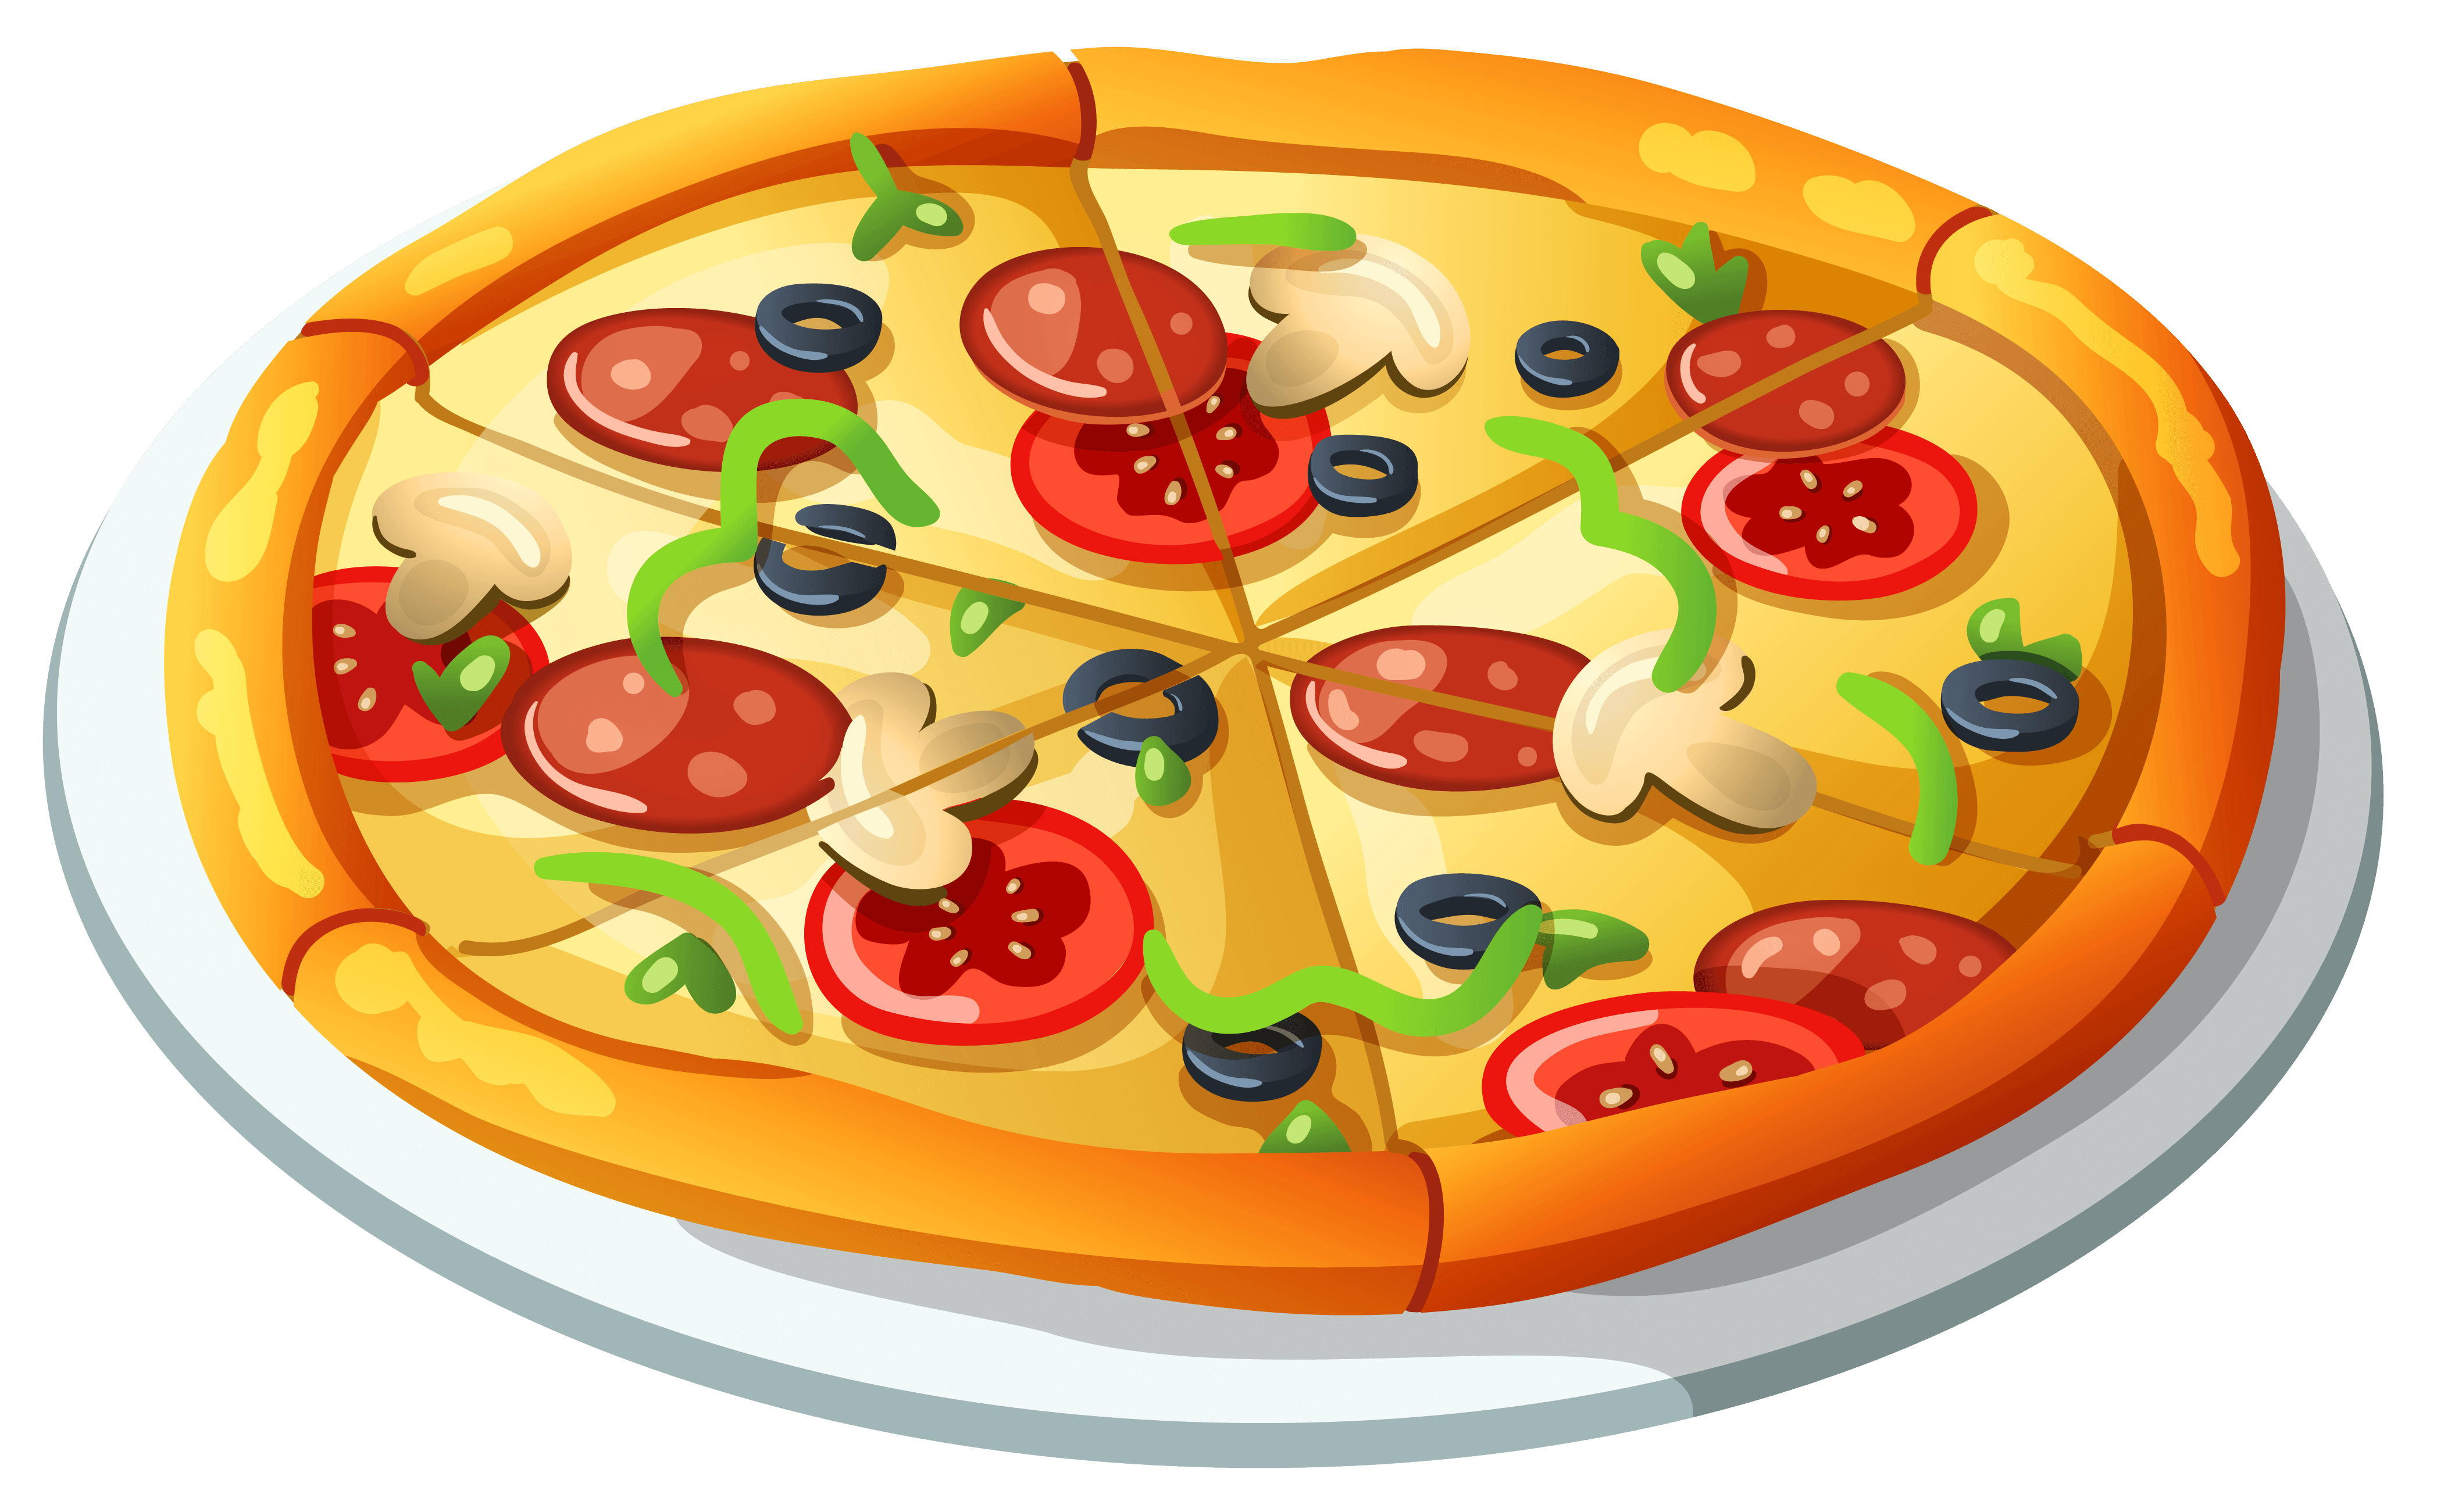 Free Pizza Clipart Png, Download Free Pizza Clipart Png png images